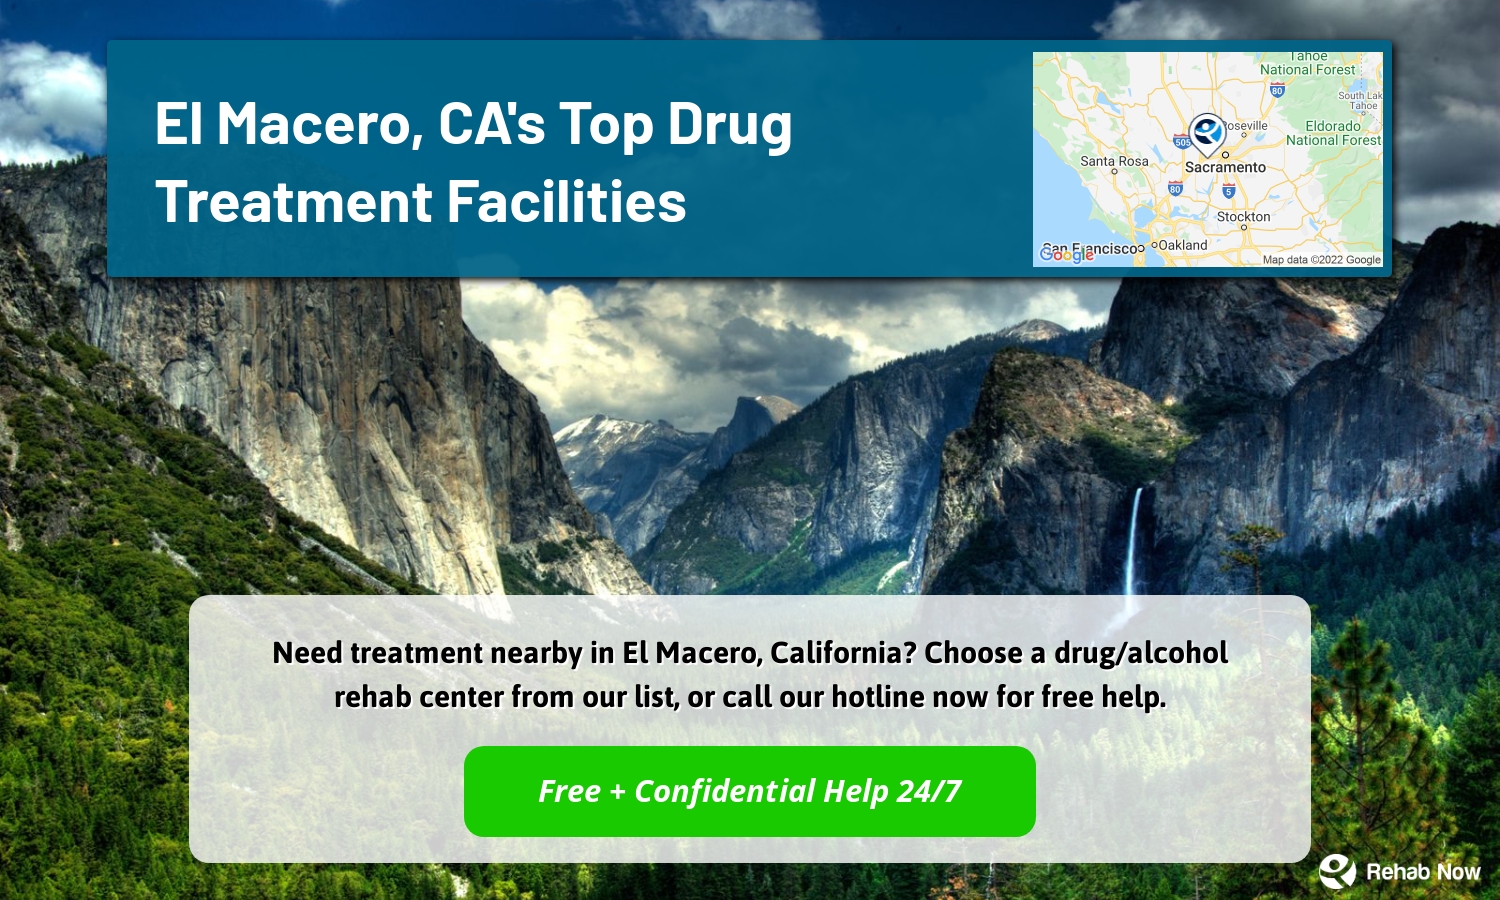 Need treatment nearby in El Macero, California? Choose a drug/alcohol rehab center from our list, or call our hotline now for free help.